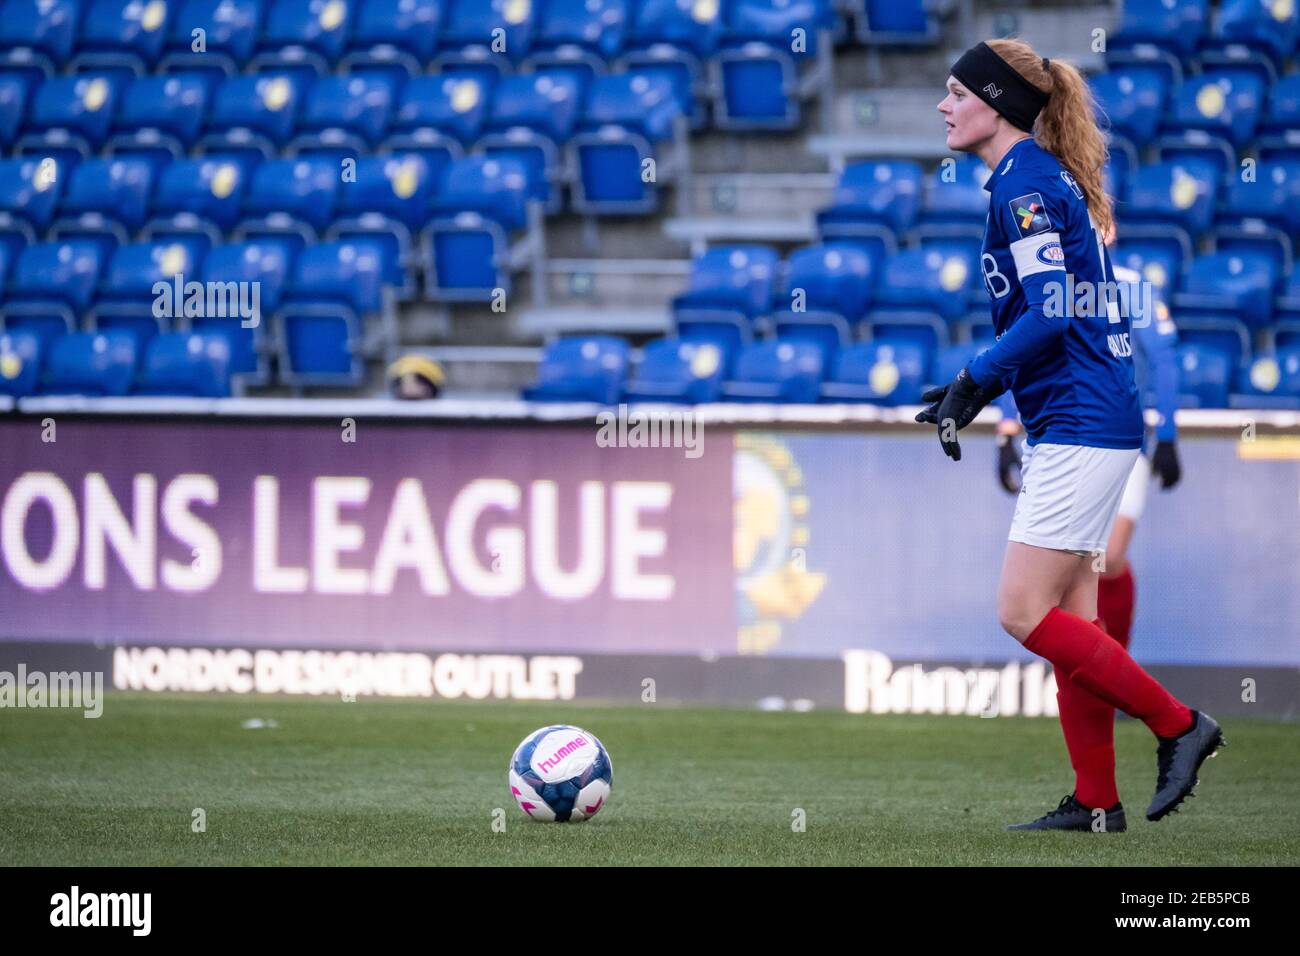 Broendby, Denmark. 11th Feb, 2021. Stine Ballisager Pedersen (23) of Valerenga IF seen during the Women's Champions League Round of 32 match between Broendby IF and Valerenga IF at Broendby Stadium in Brondby, Denmark. (Photo Credit: Gonzales Photo/Alamy Live News Stock Photo